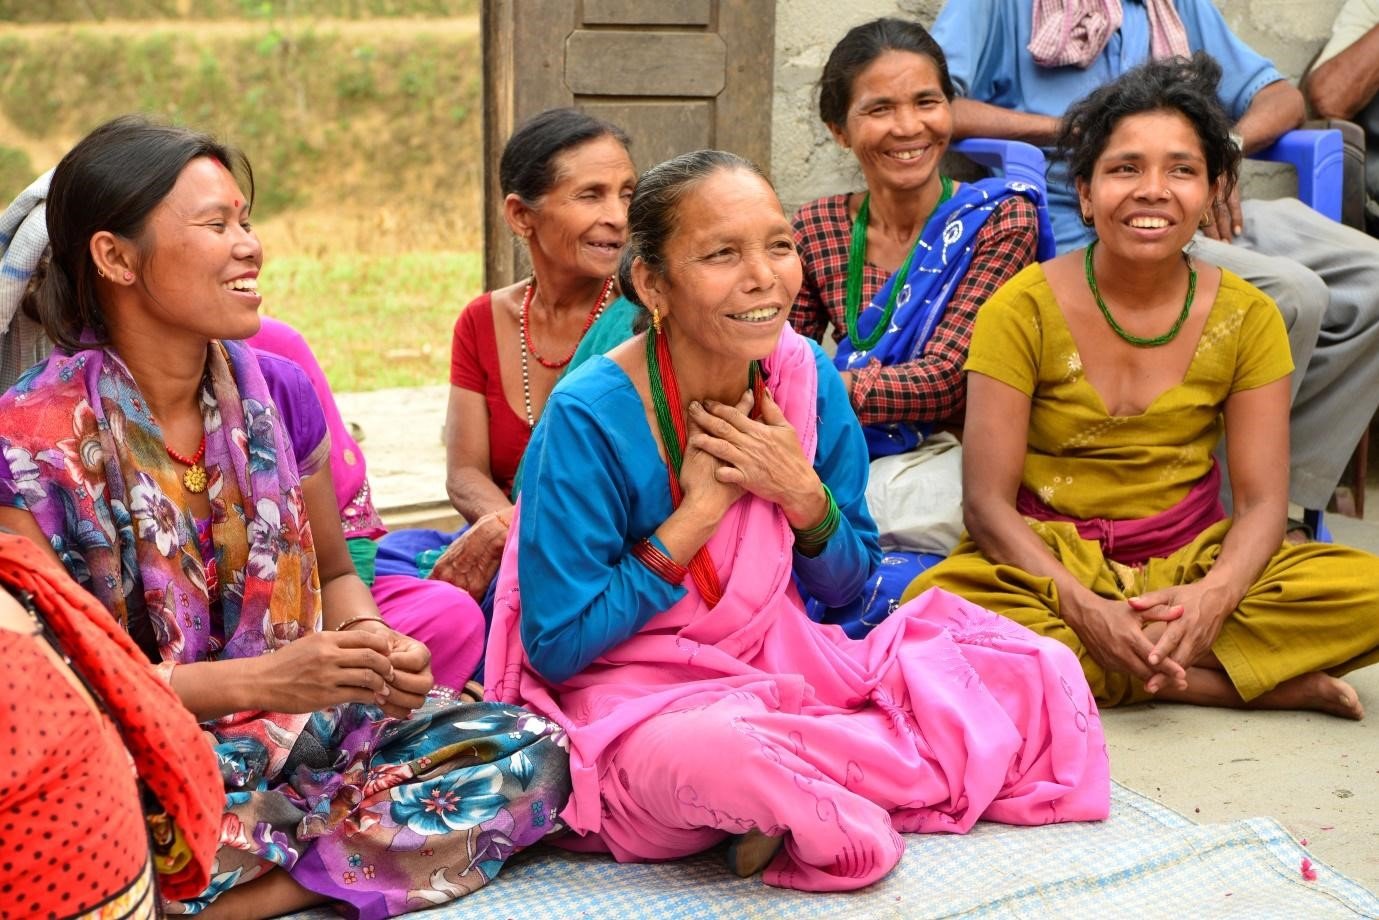 Patili Maya (centre) and the other members of Ranichur self-help group.